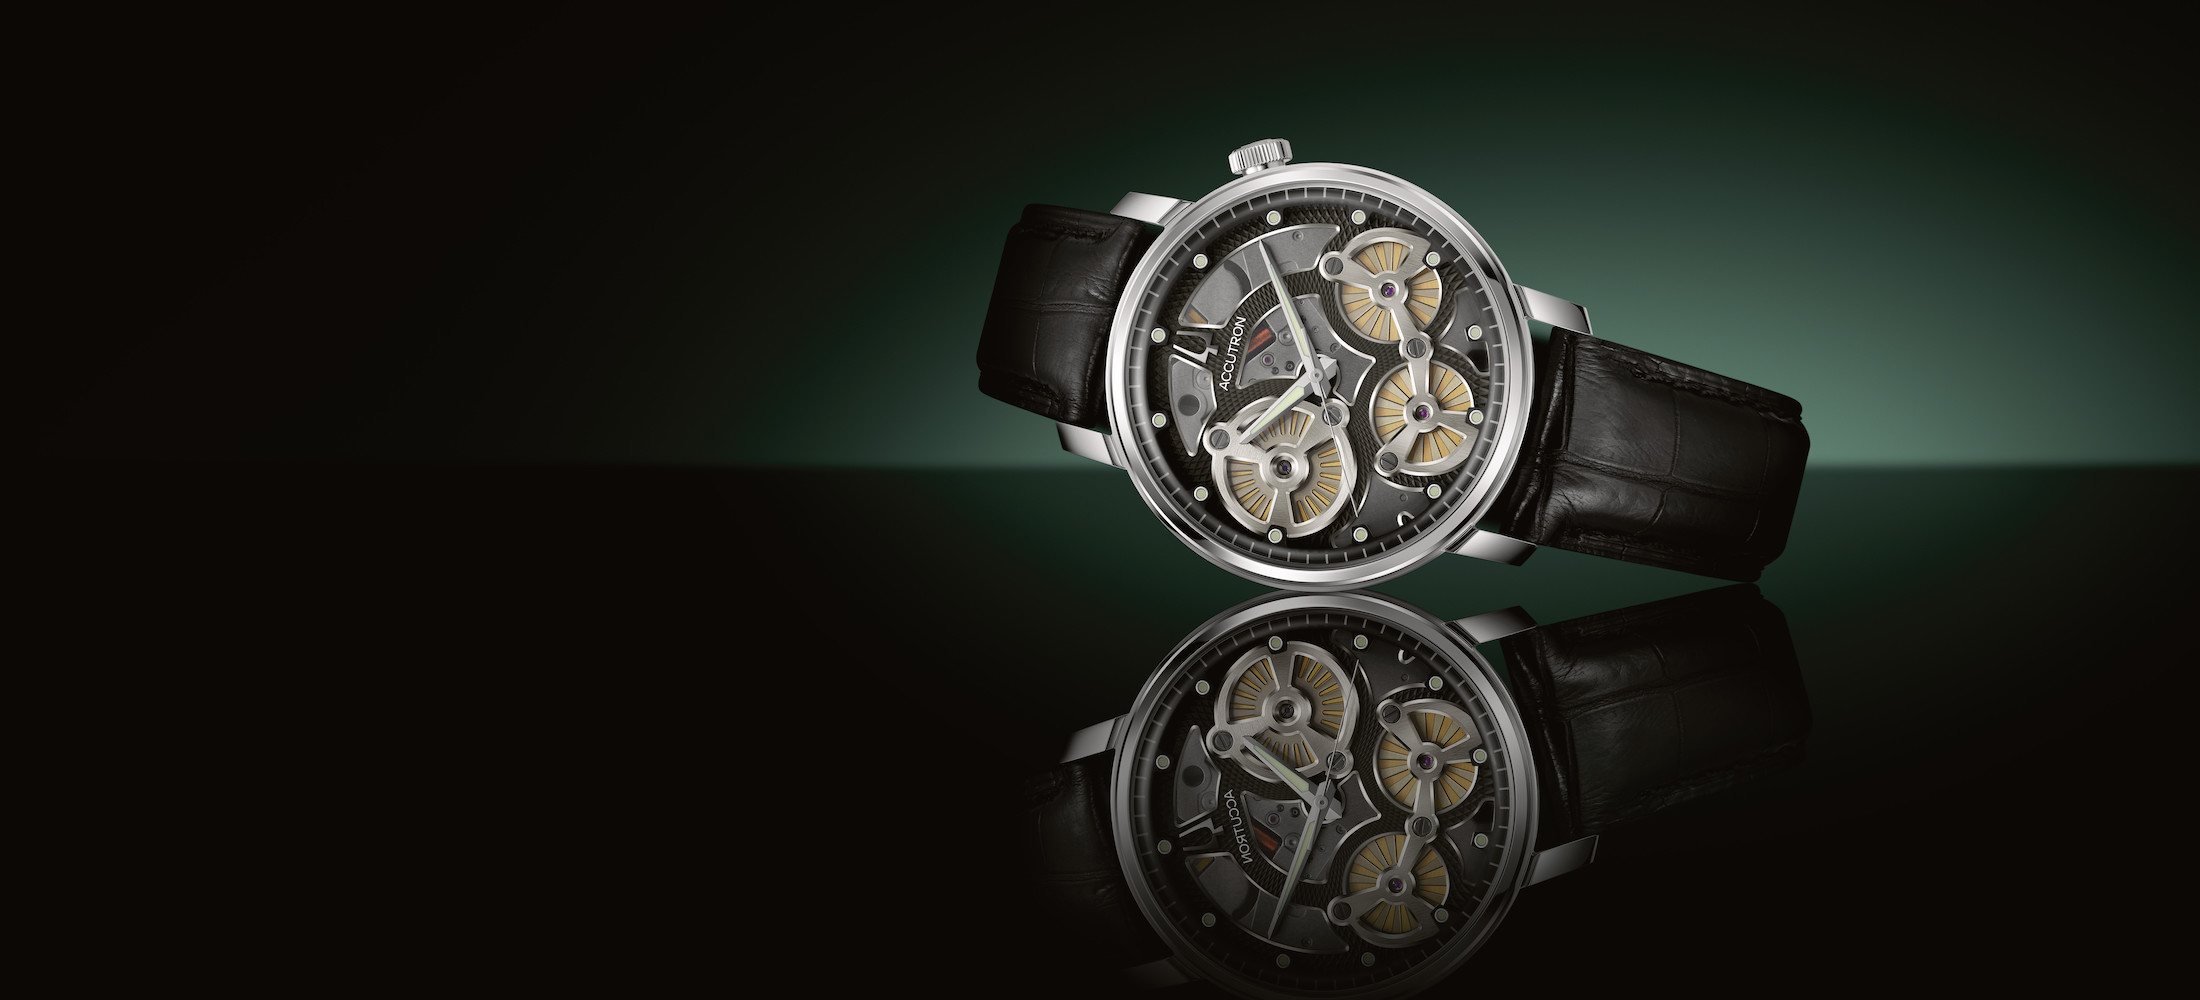 Accutron Spaceview Evolution Watch